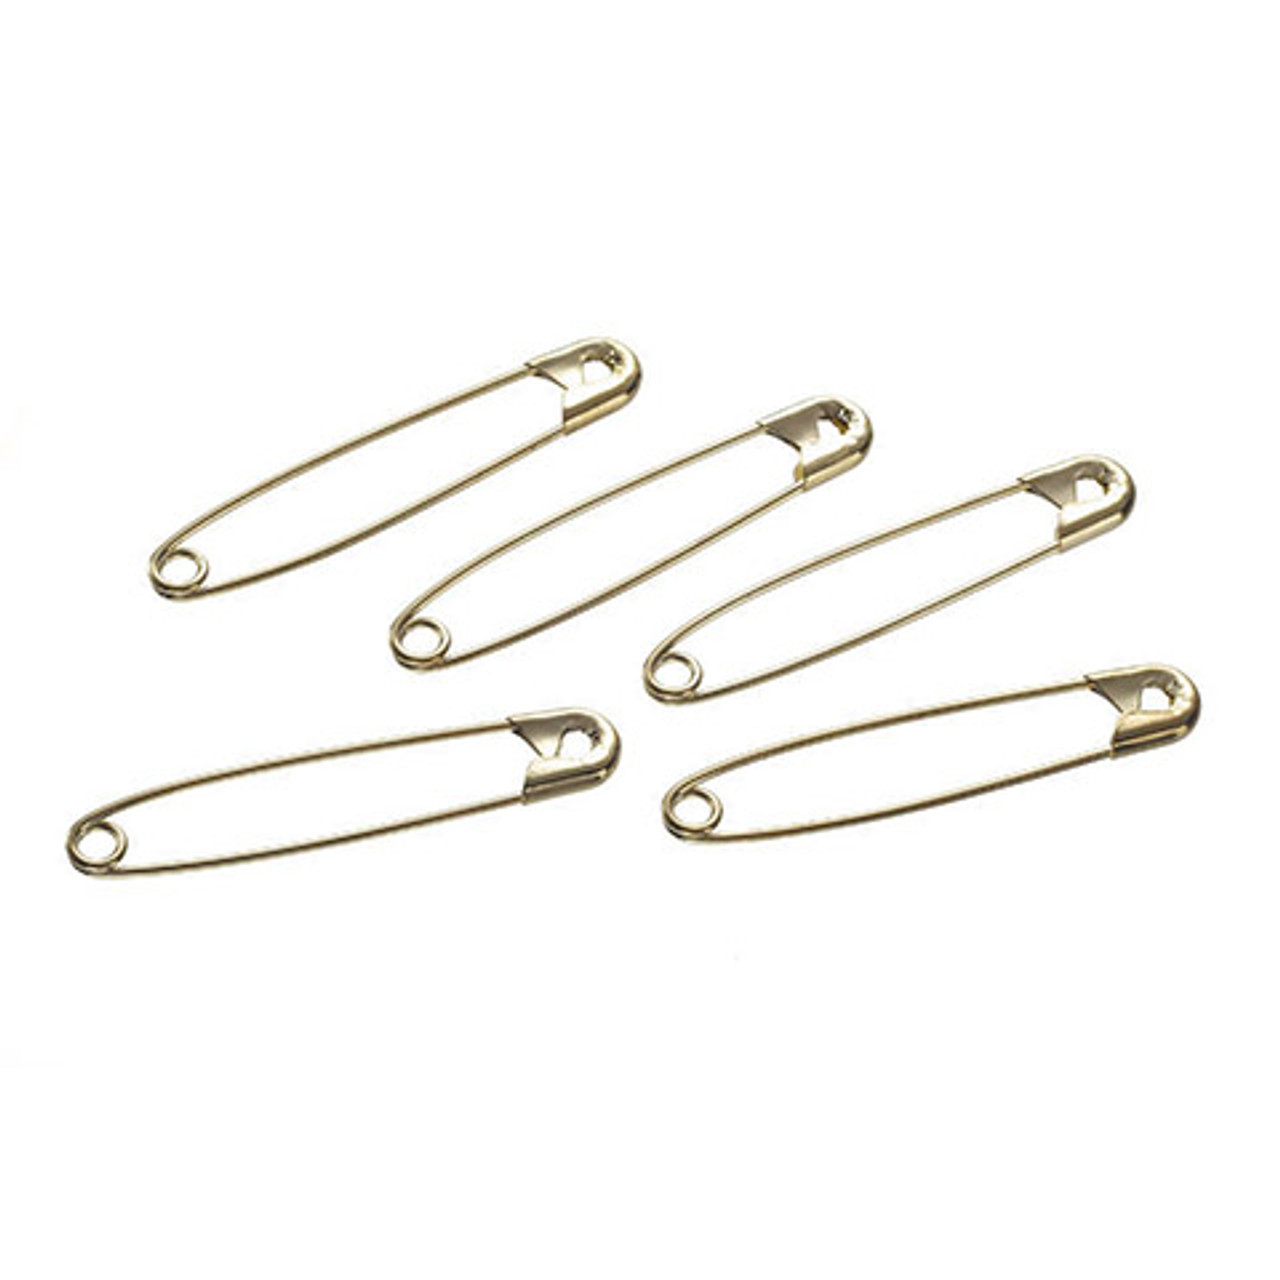 Safety Pins #4, Nickel, 2.25 long, Pack of 144 